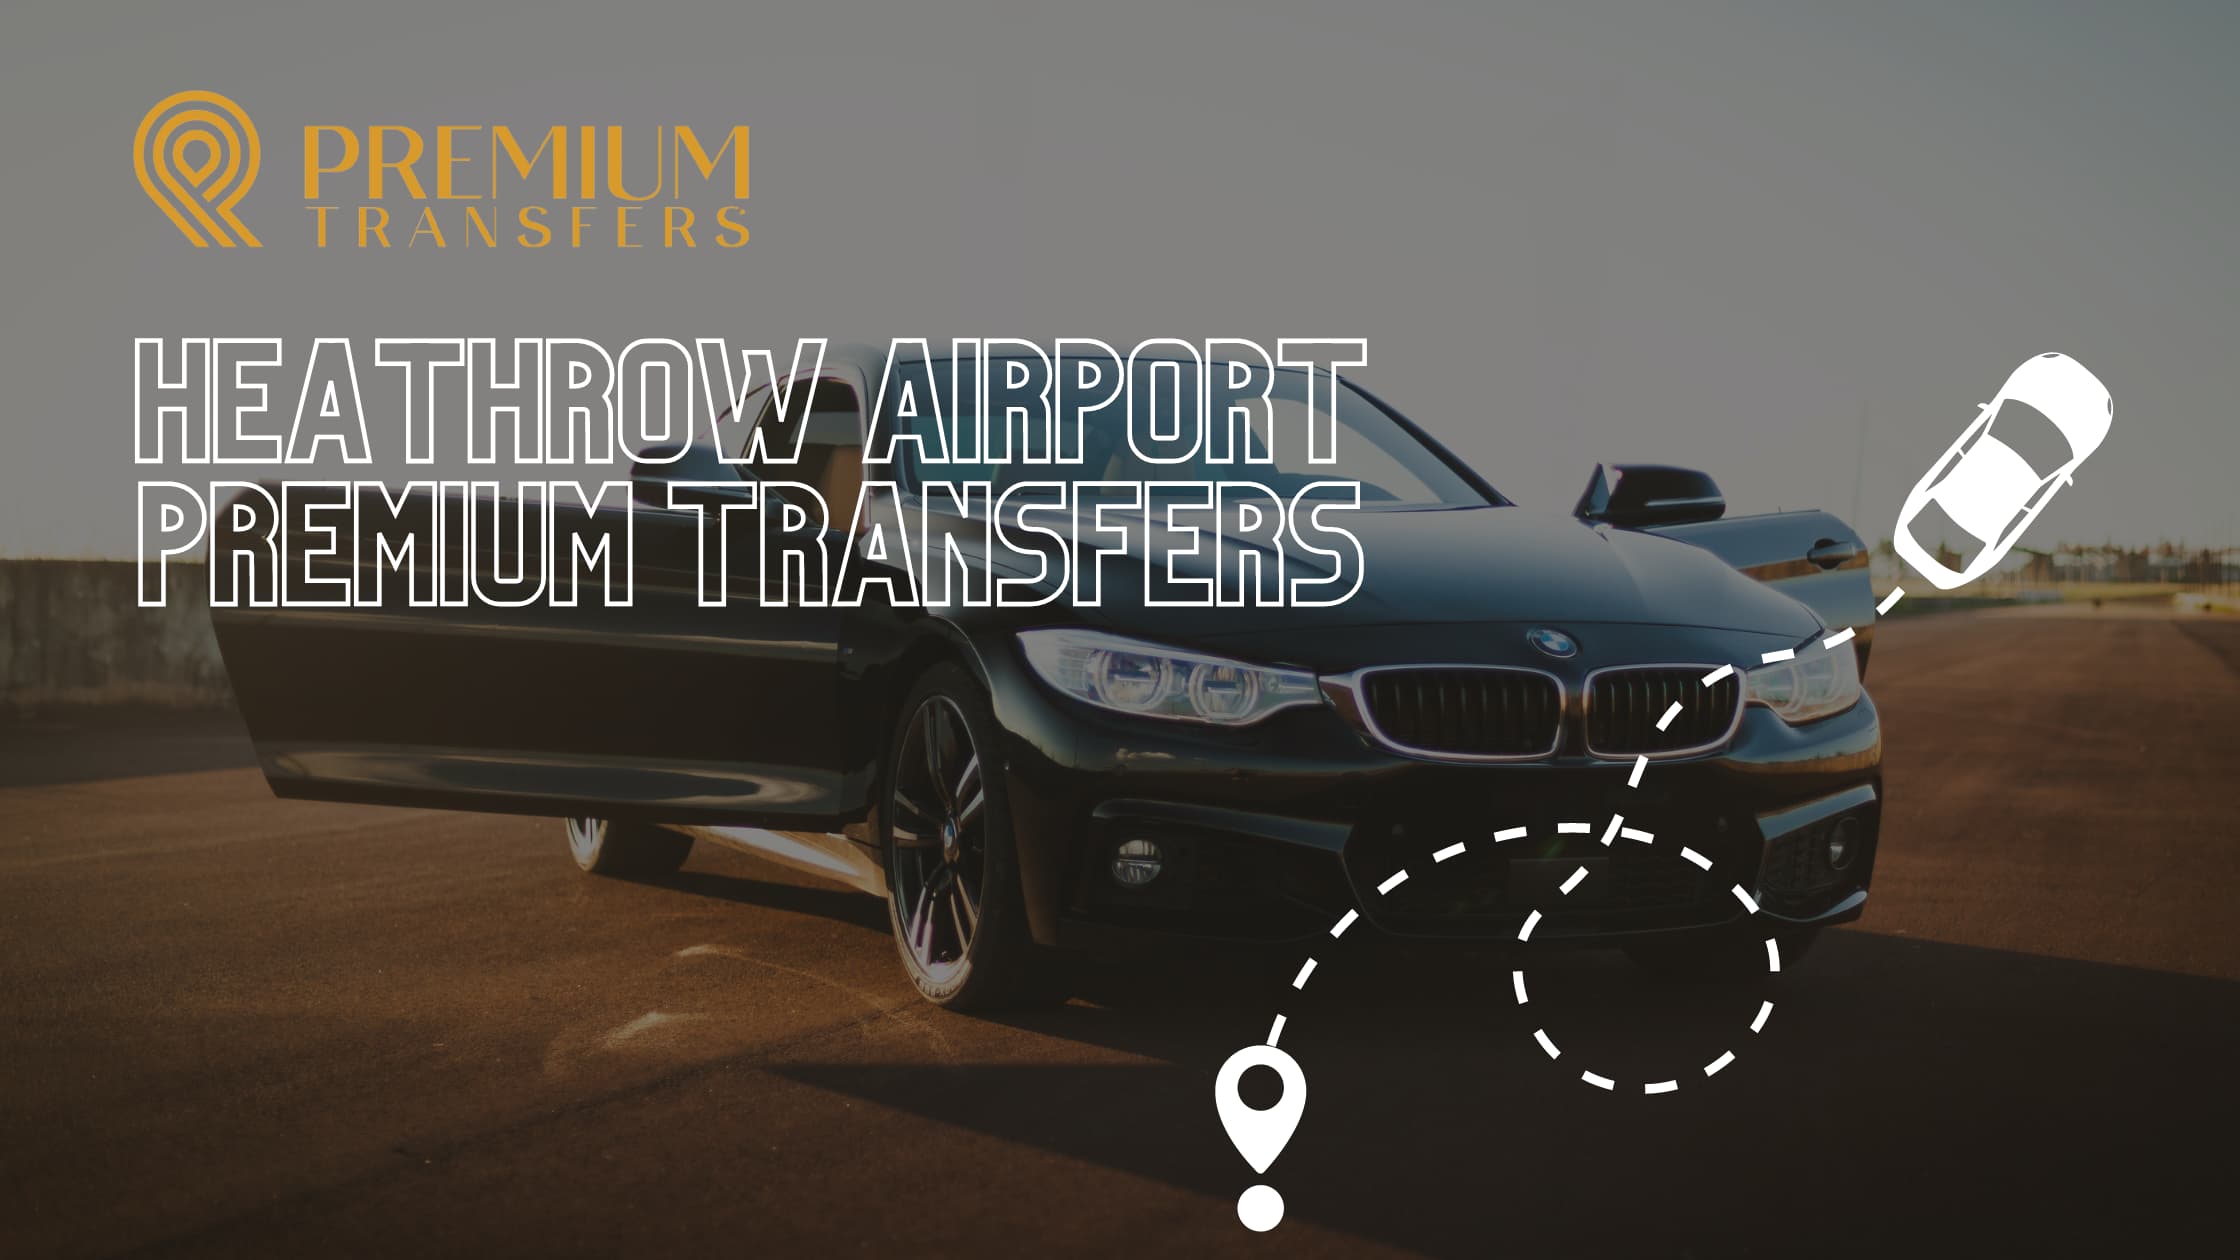 Heathrow Airport Premium Transfers: Your Passport to Smooth Travels